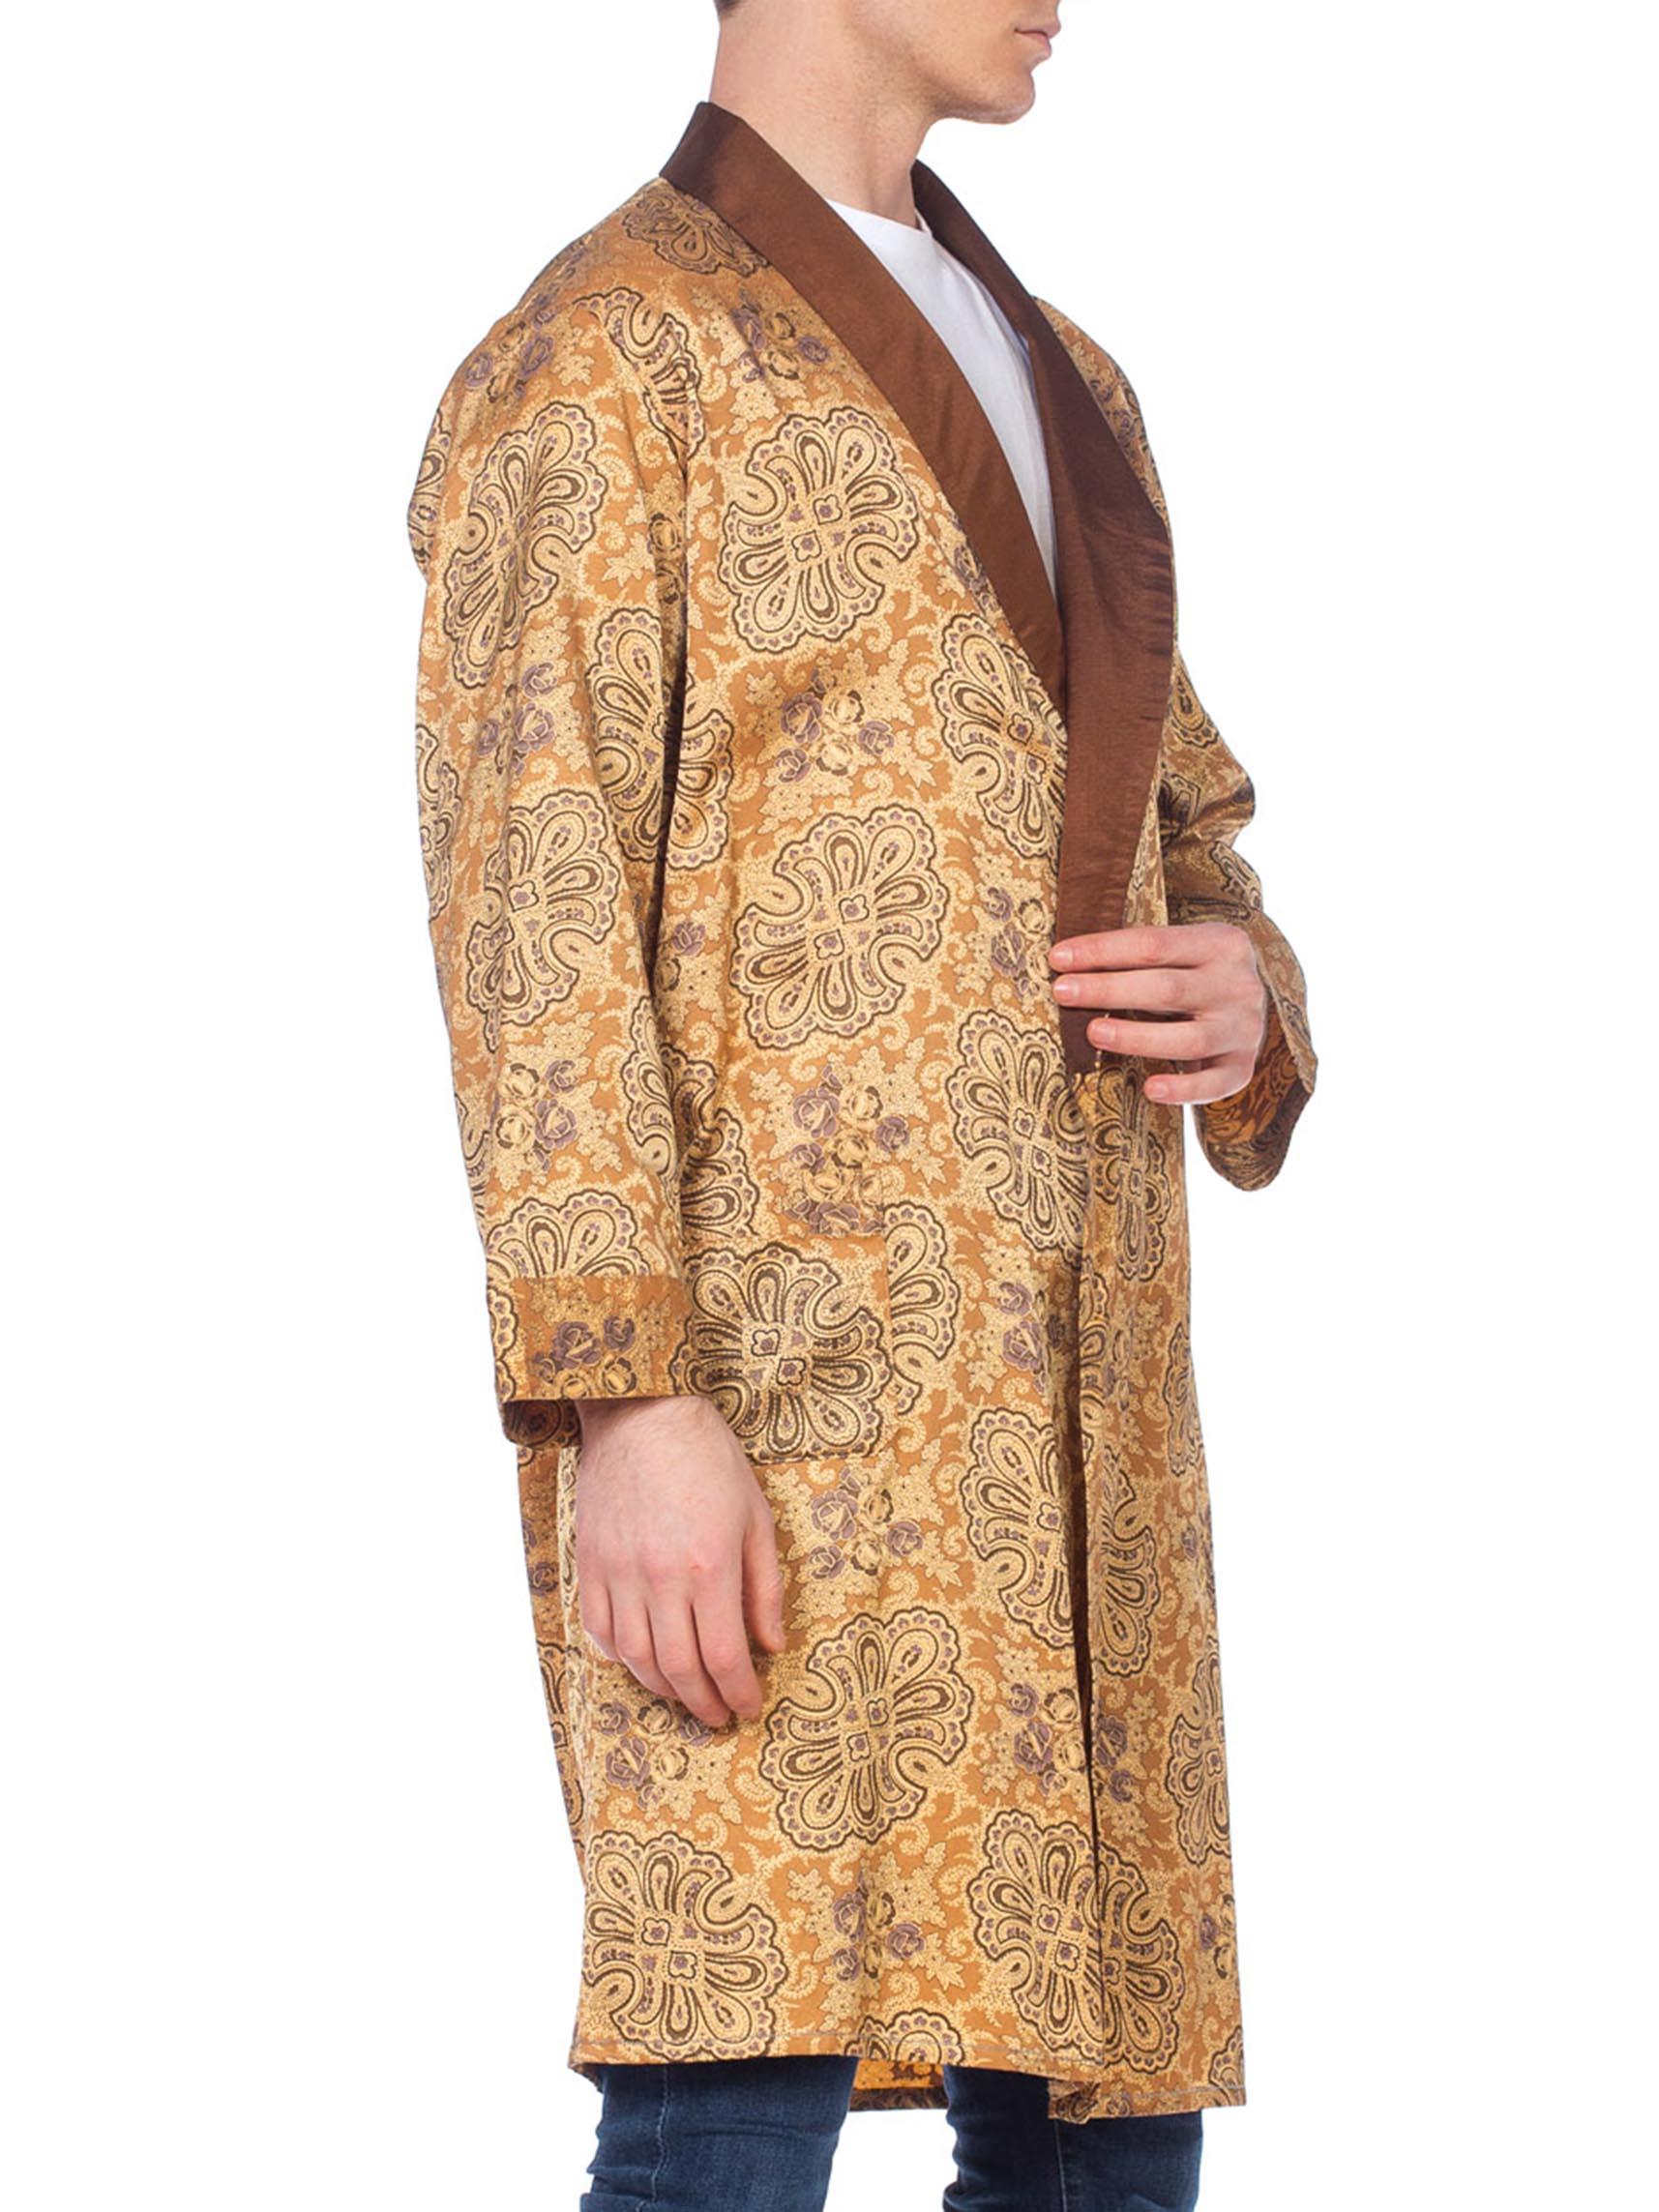 Men's Mens 1960's Satin Flanel Gold Paisley Robe with Belt